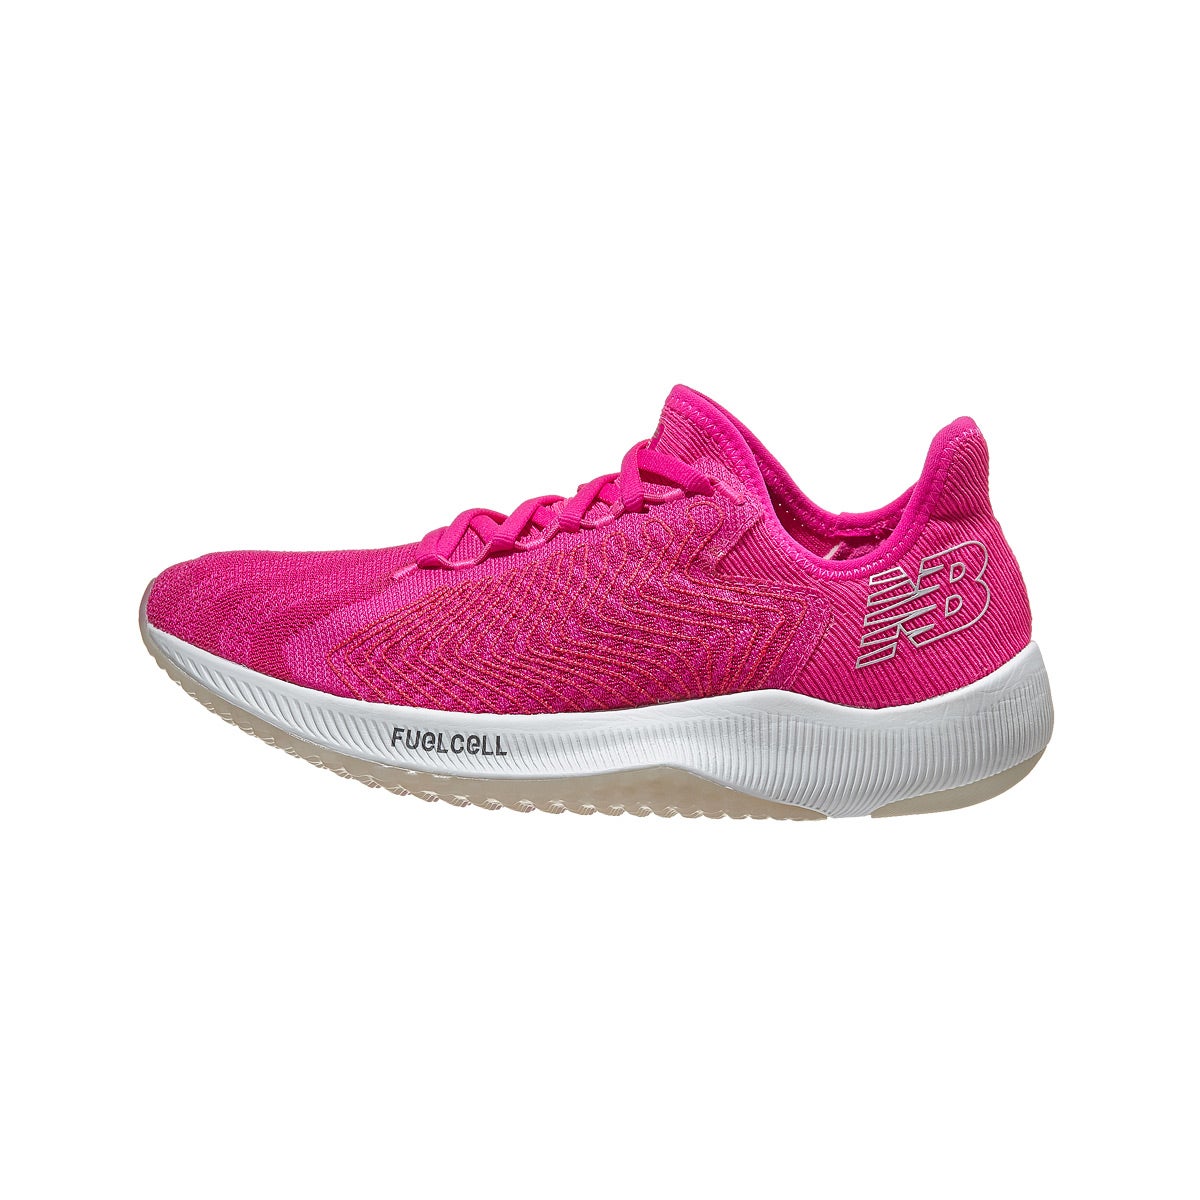 New Balance FuelCell Rebel Women's Shoes Peony/Coral 360° View ...